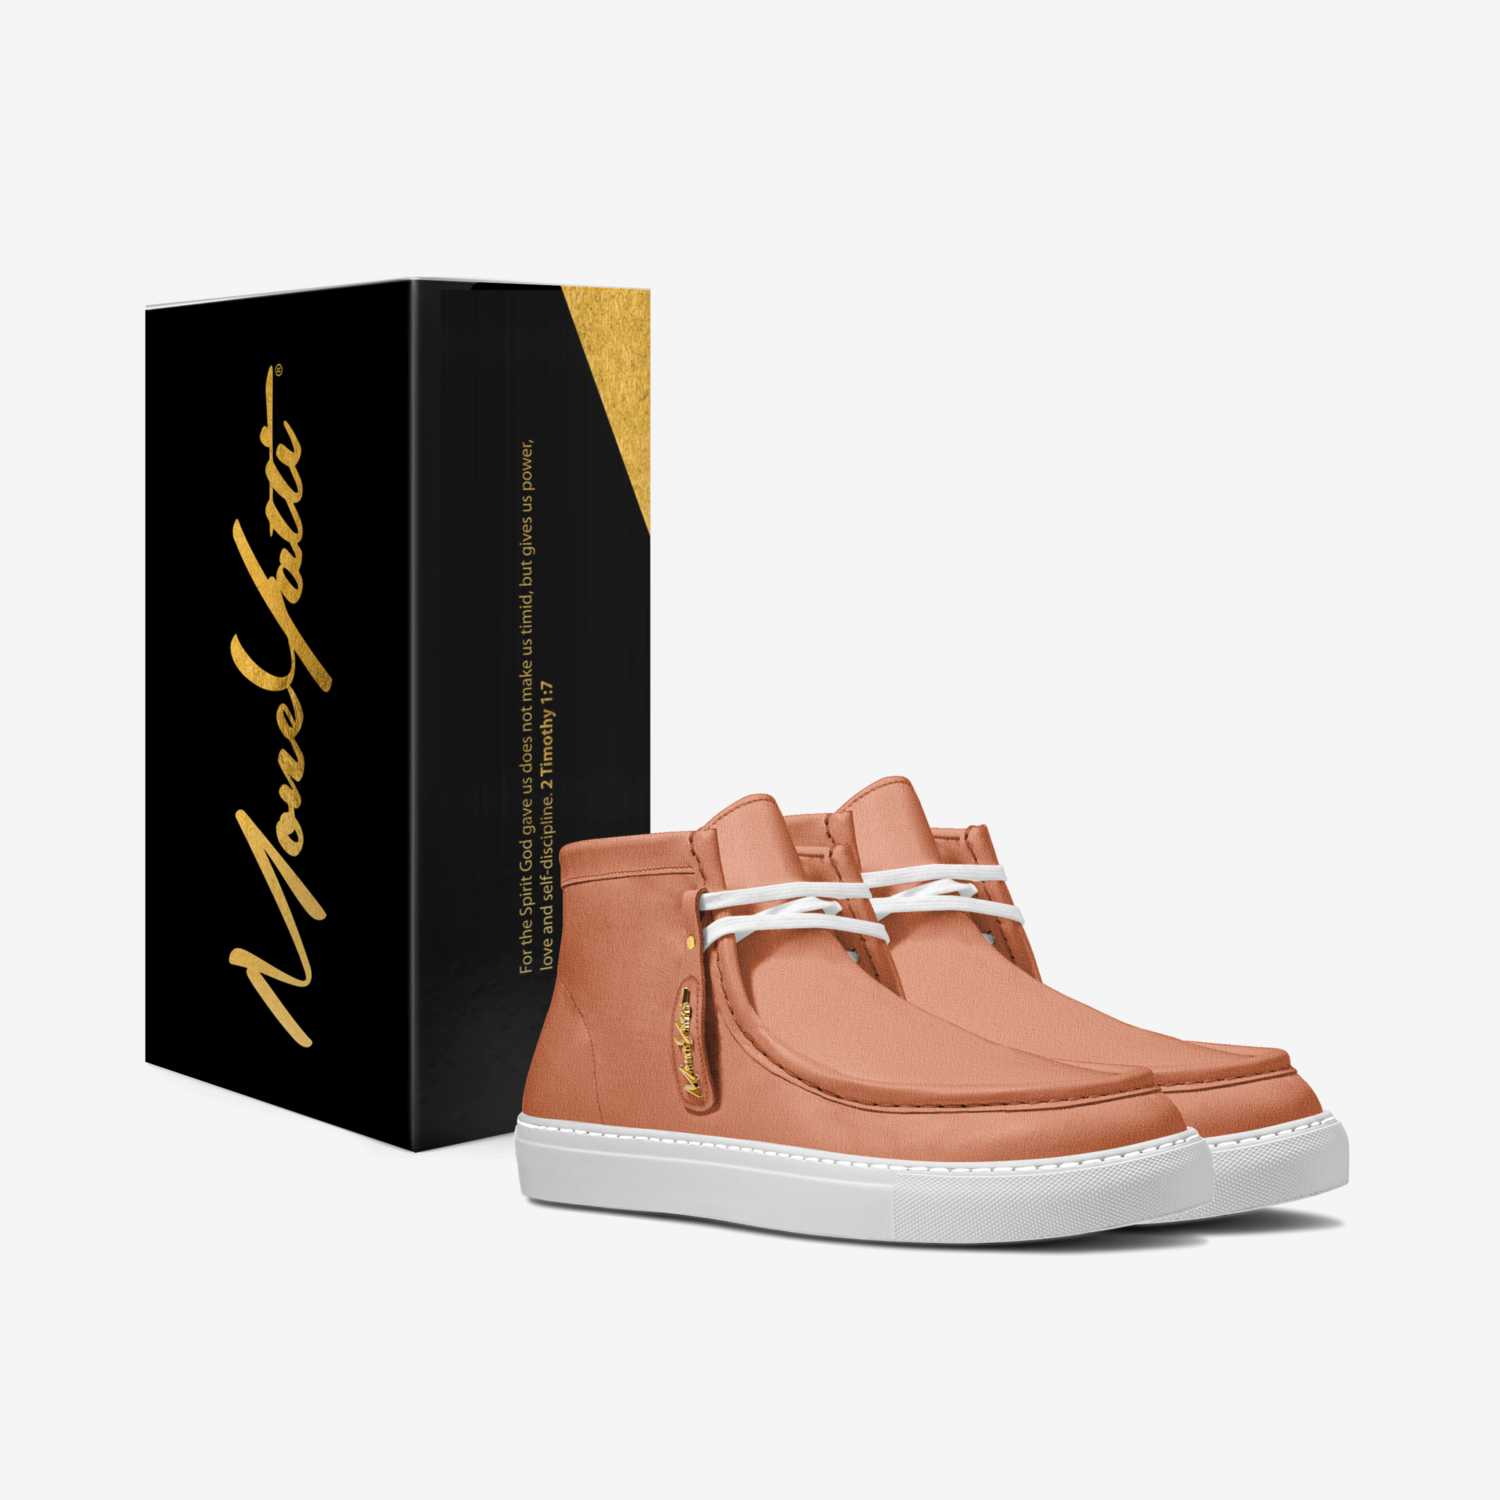 LUX SUEDE 002 custom made in Italy shoes by Moneyatti Brand | Box view